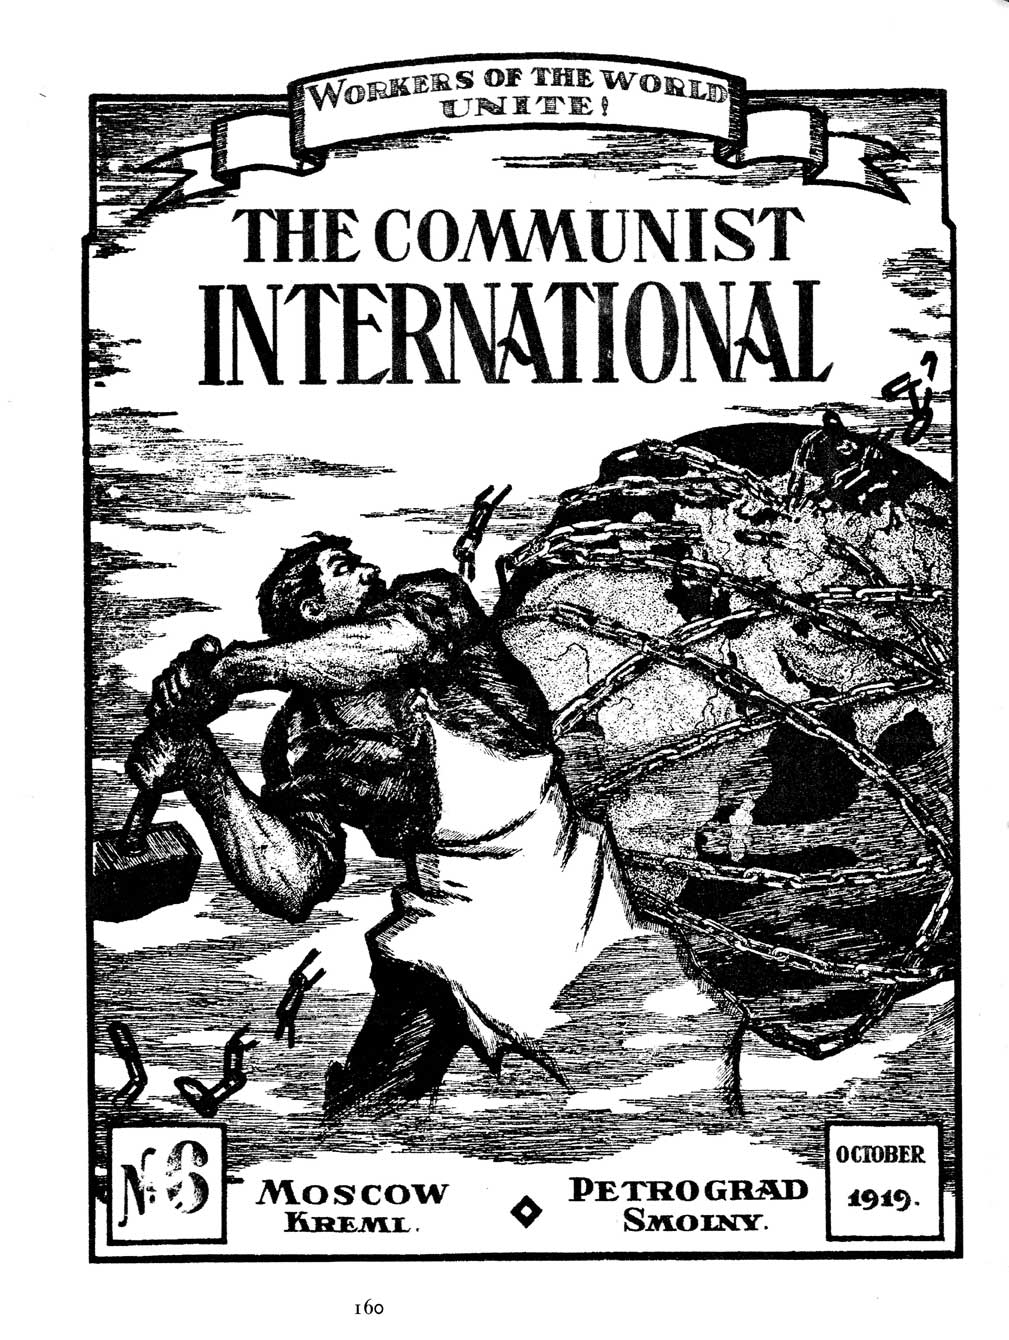 Cover of issue 6 of the English-language version of The Communist International, October 1919